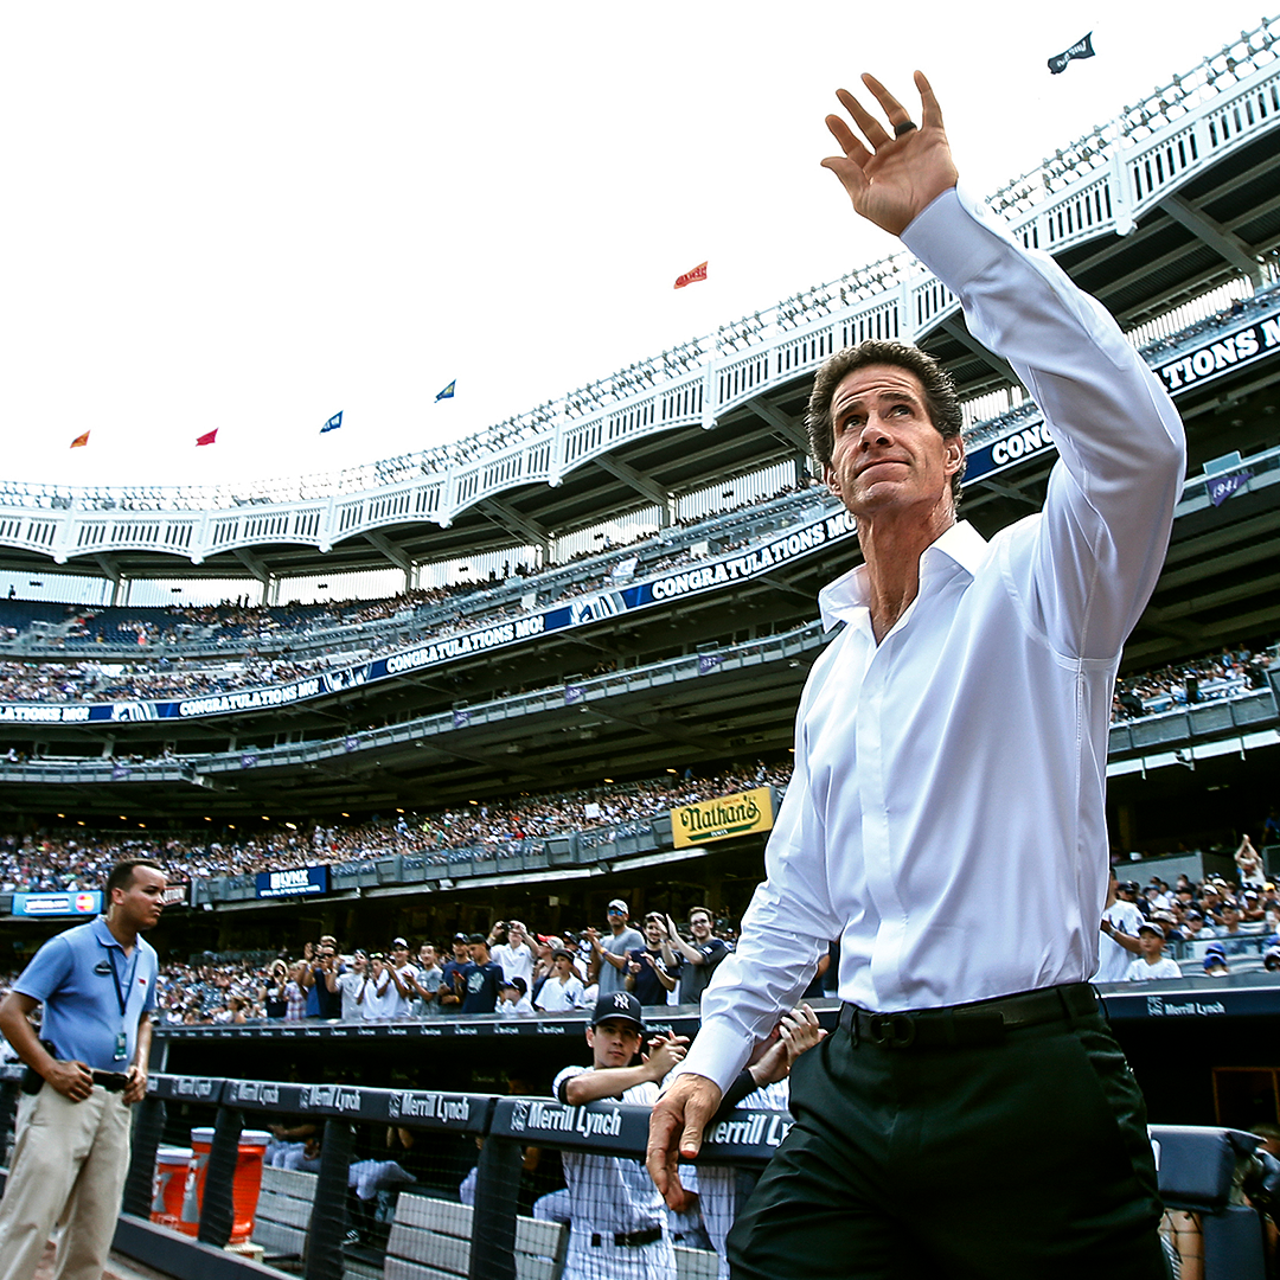 Paul O'Neill Number Retirement before Yankees vs. Blue Jays on